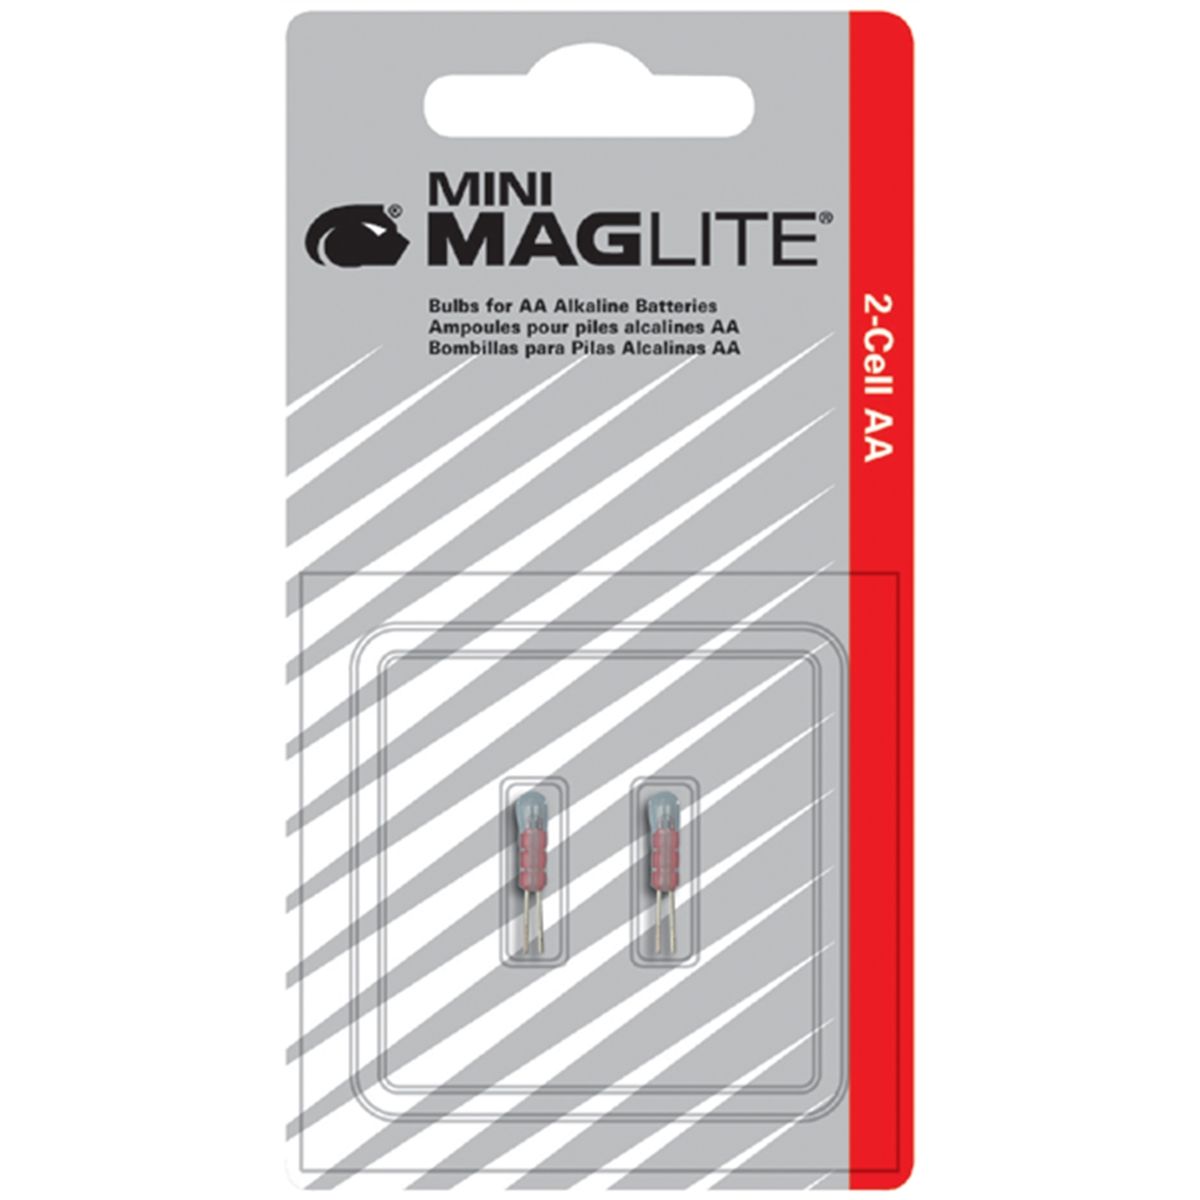 Replacement Bulb For Mini Magliter Size AA - 2/Pk...